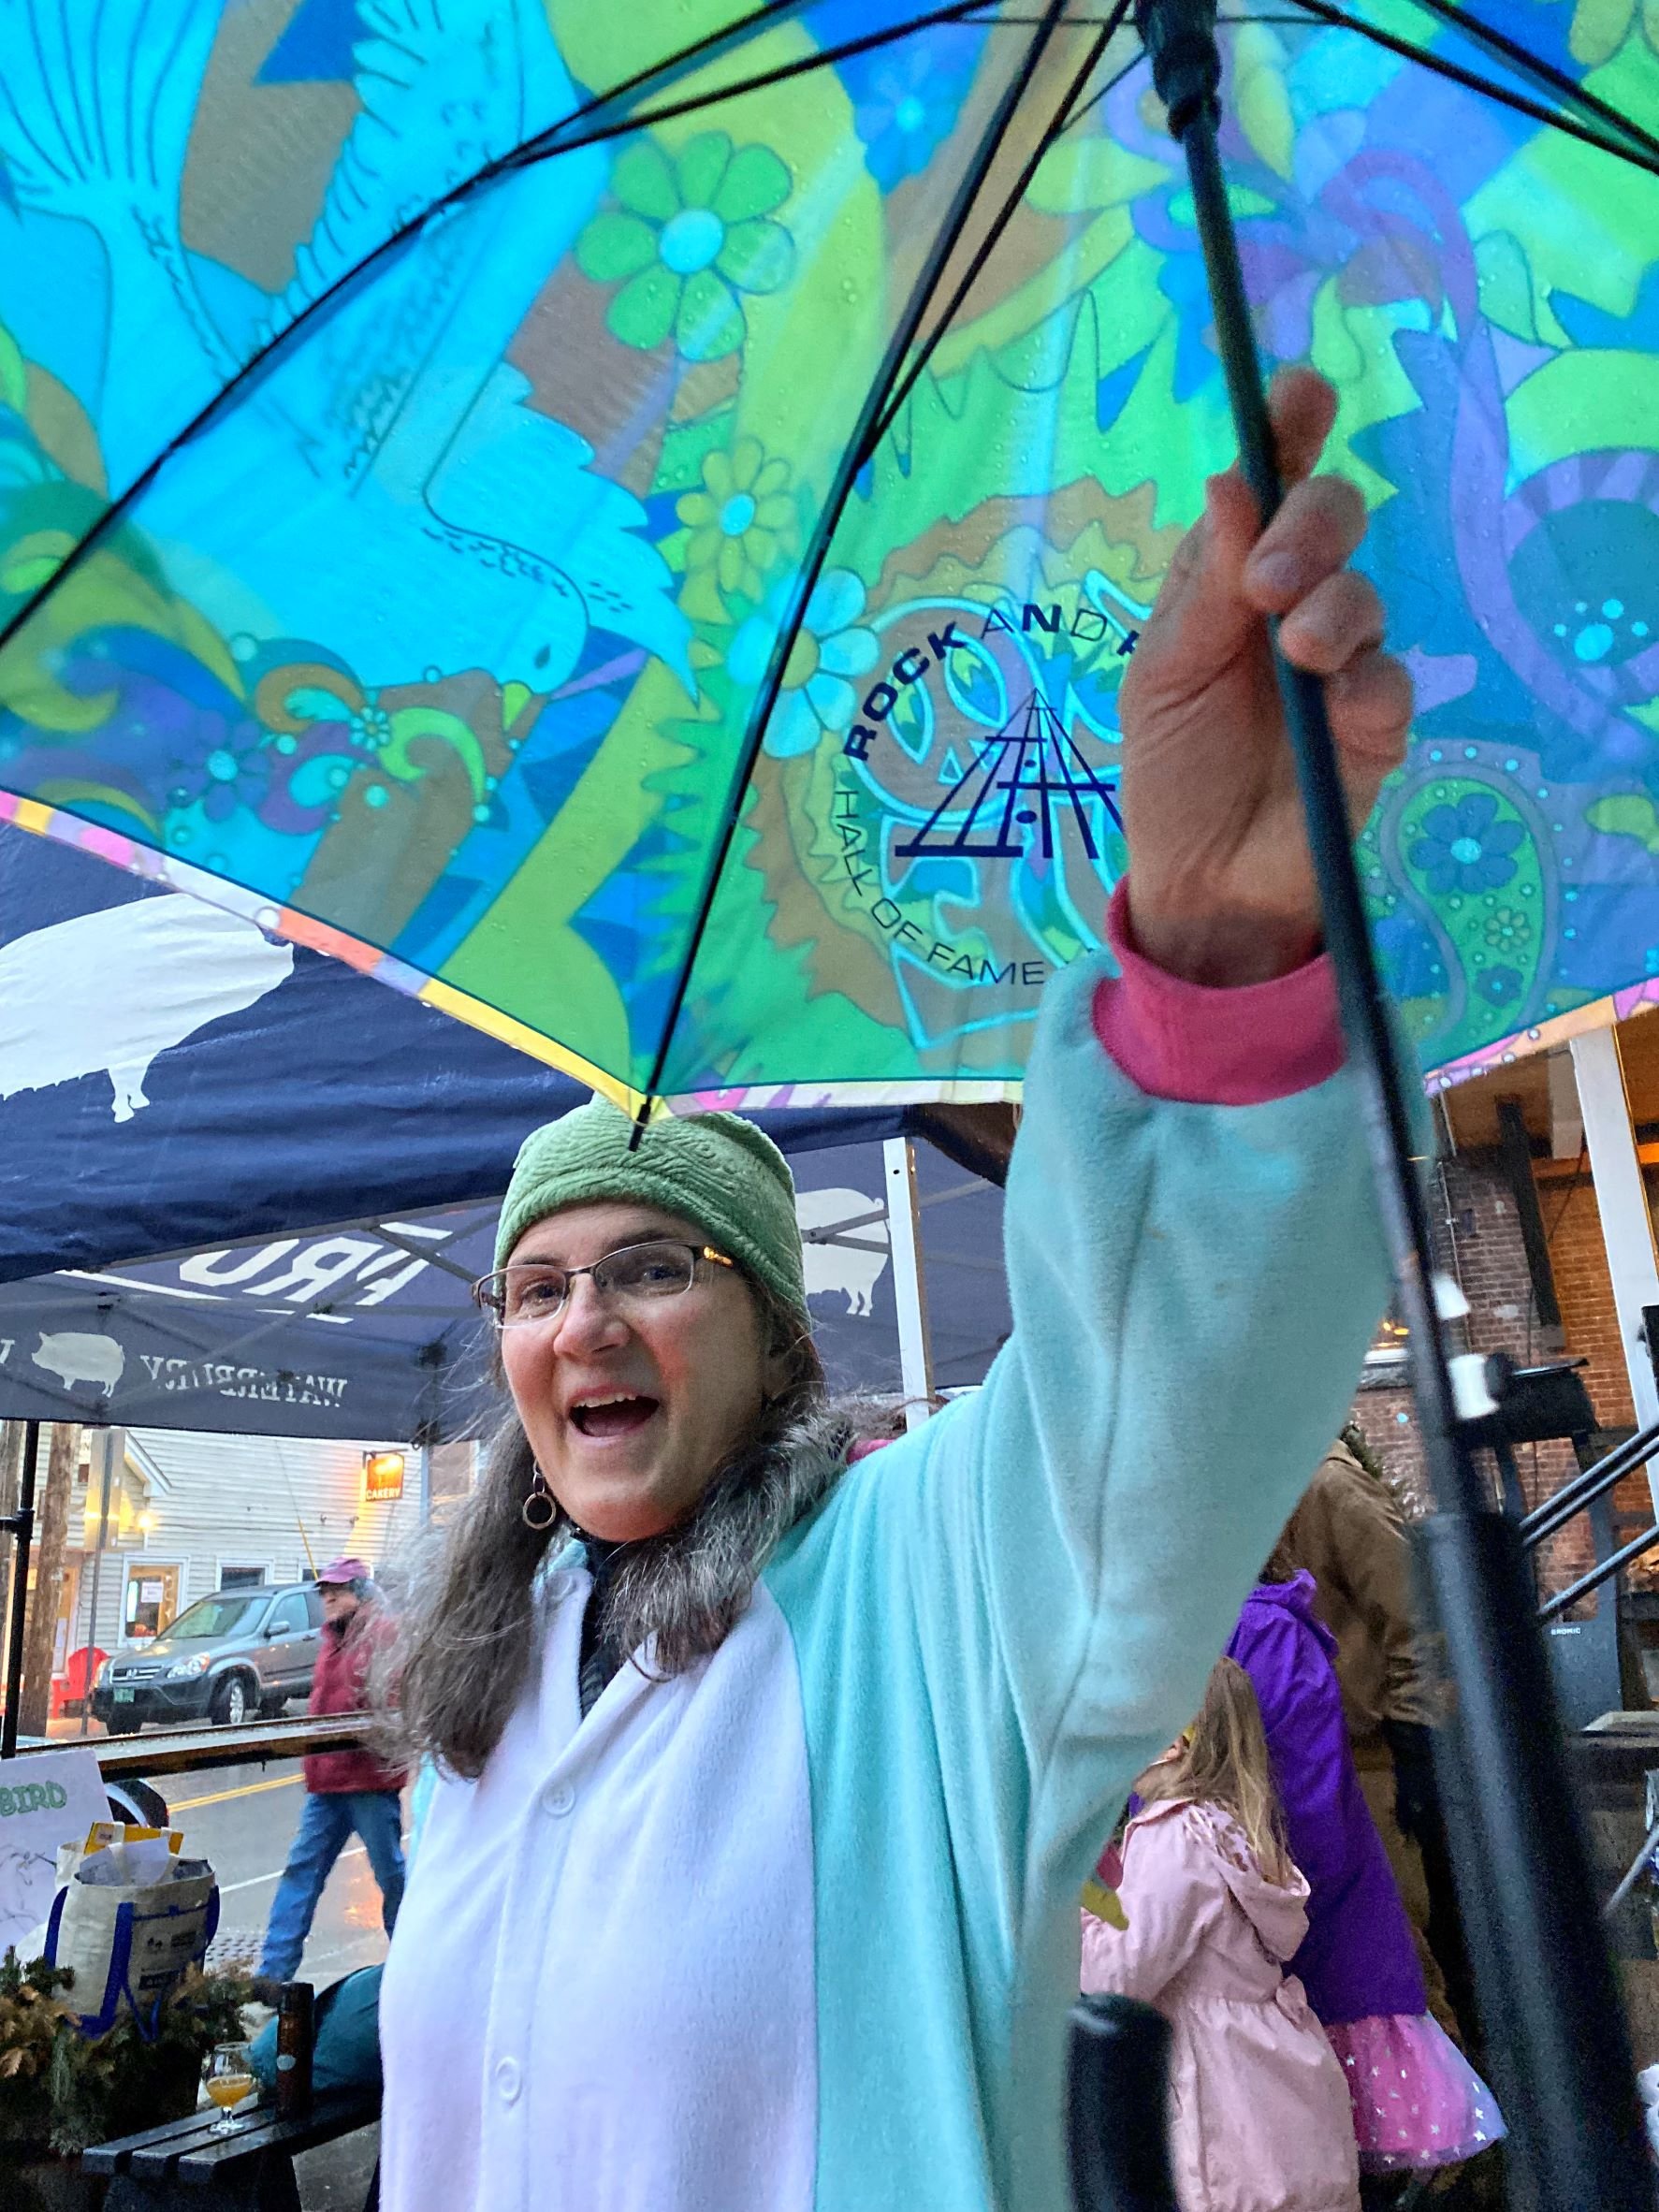  Wassailing outdoors this year meant contending with Mother Nature on April Fool’s Day. Organizer Beth Gilpin was prepared with umbrellas, a pop-up tent and more. Photo by Gordon Miller 